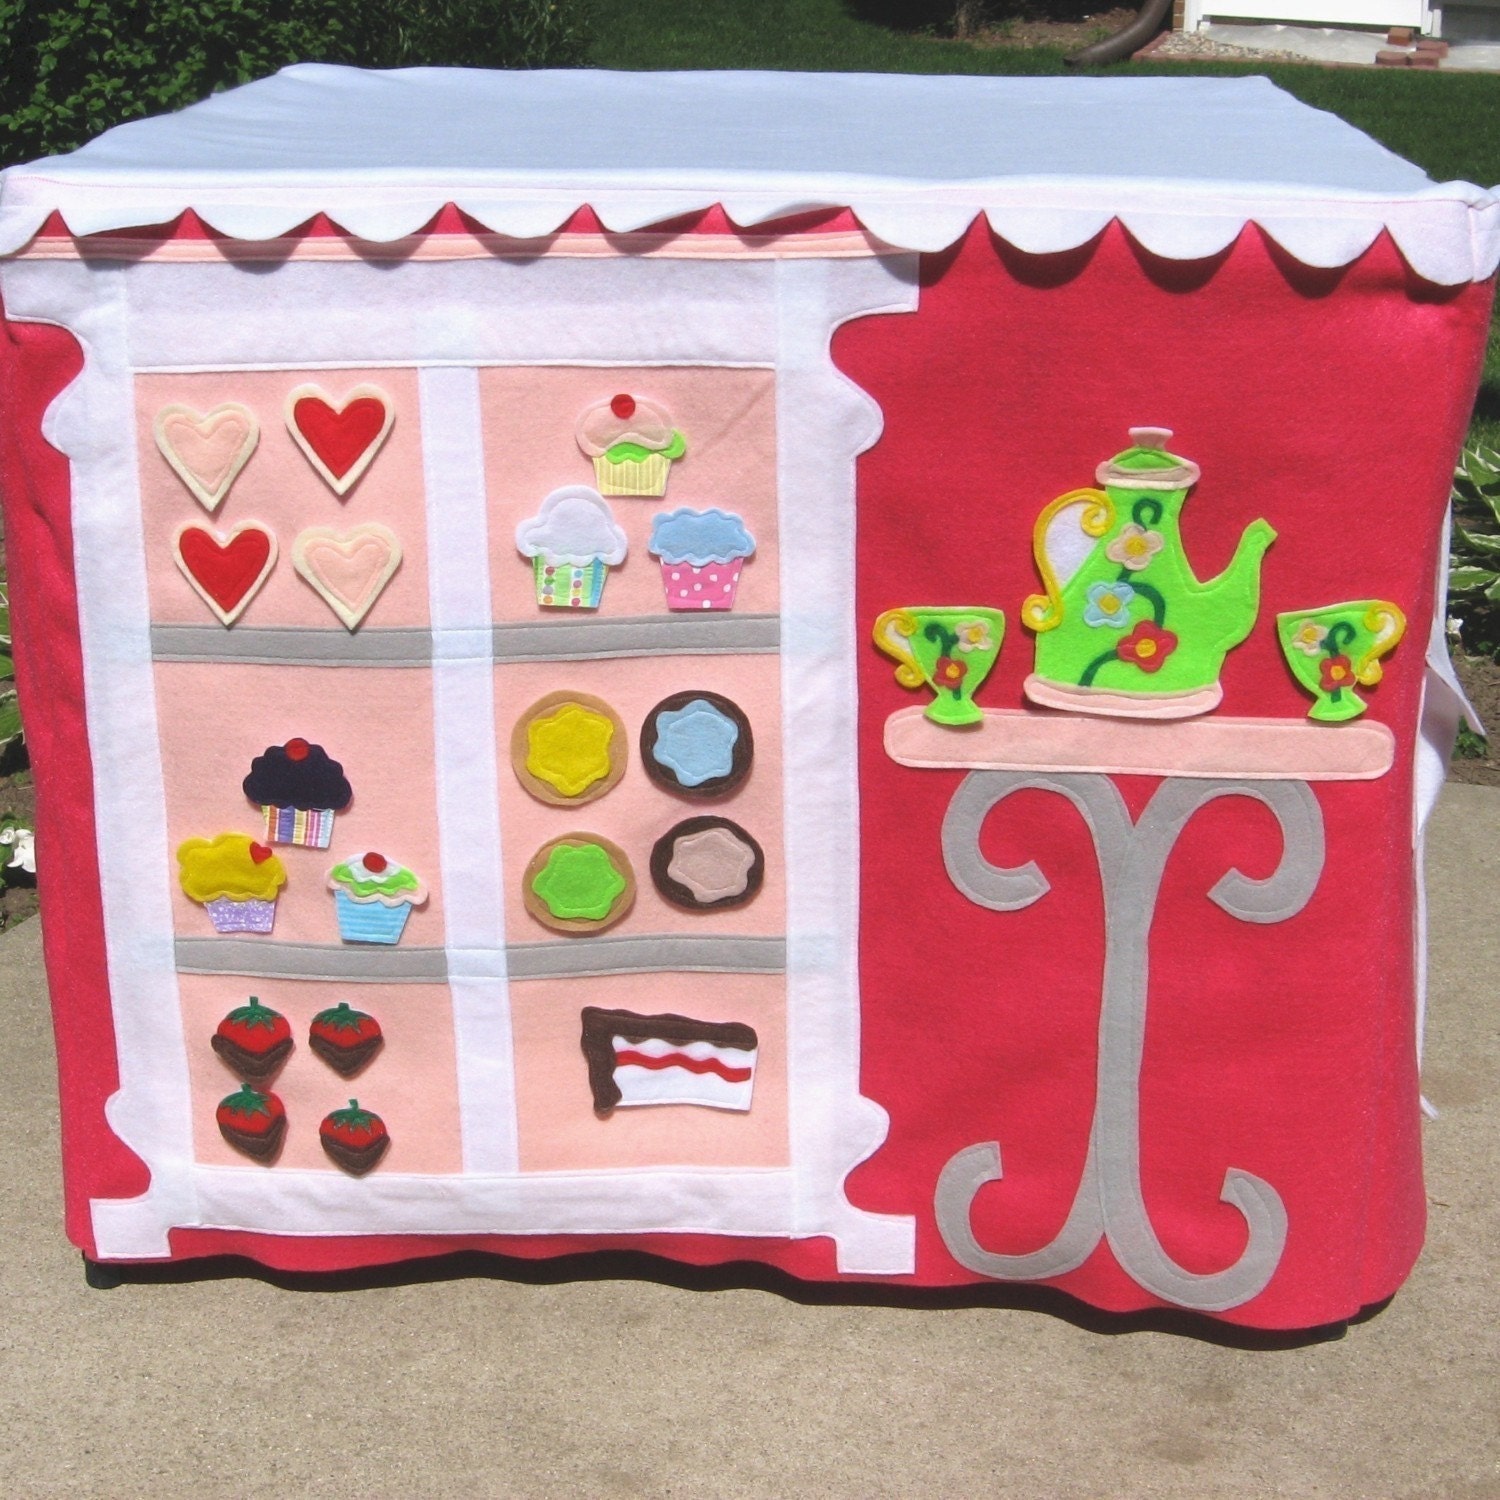 The CupCakery Card Table Playhouse, White Scalloped Roof, Brighter Colors, Custom Order, Personalized, 40 removable and replaceable pieces